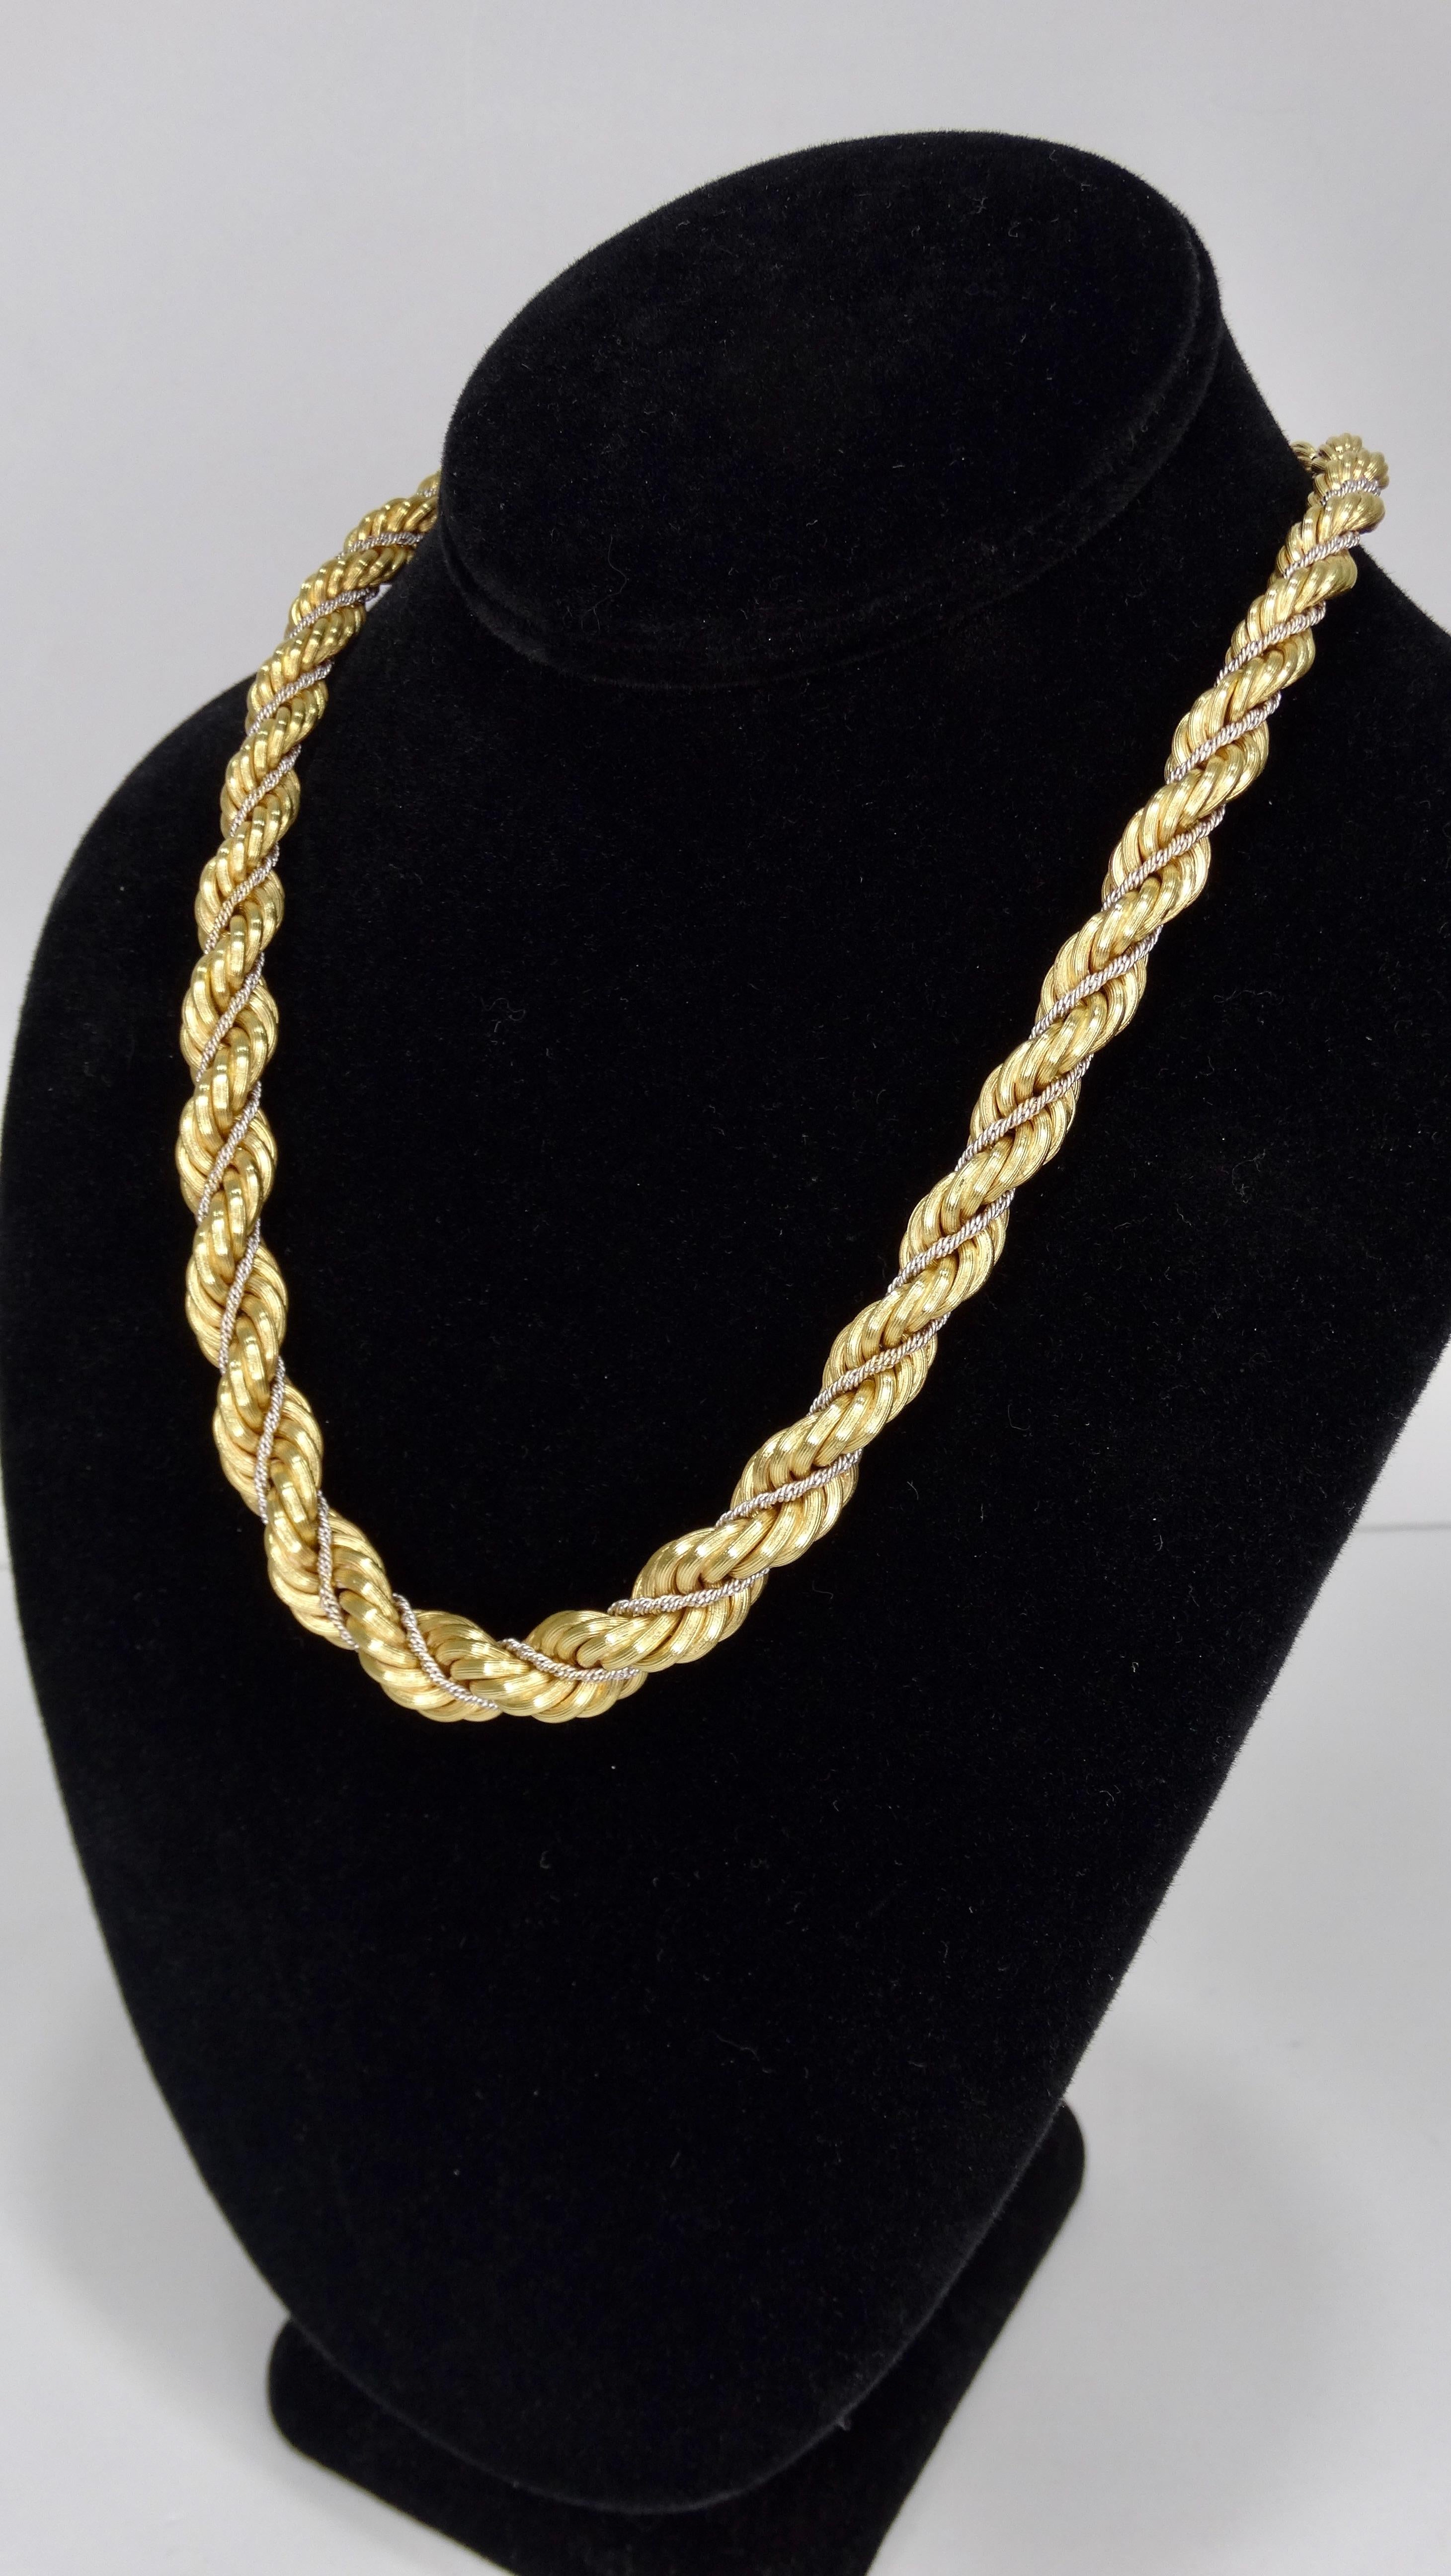 Top Favorite of ours... this Beautiful 18k Gold necklace featuring a double gold rope twist design and a single 14k white gold, Stamped 750 and 166VI. Total weight 62.77g. Perfect to layer with your favorite cuban link gold chains or wear alone!